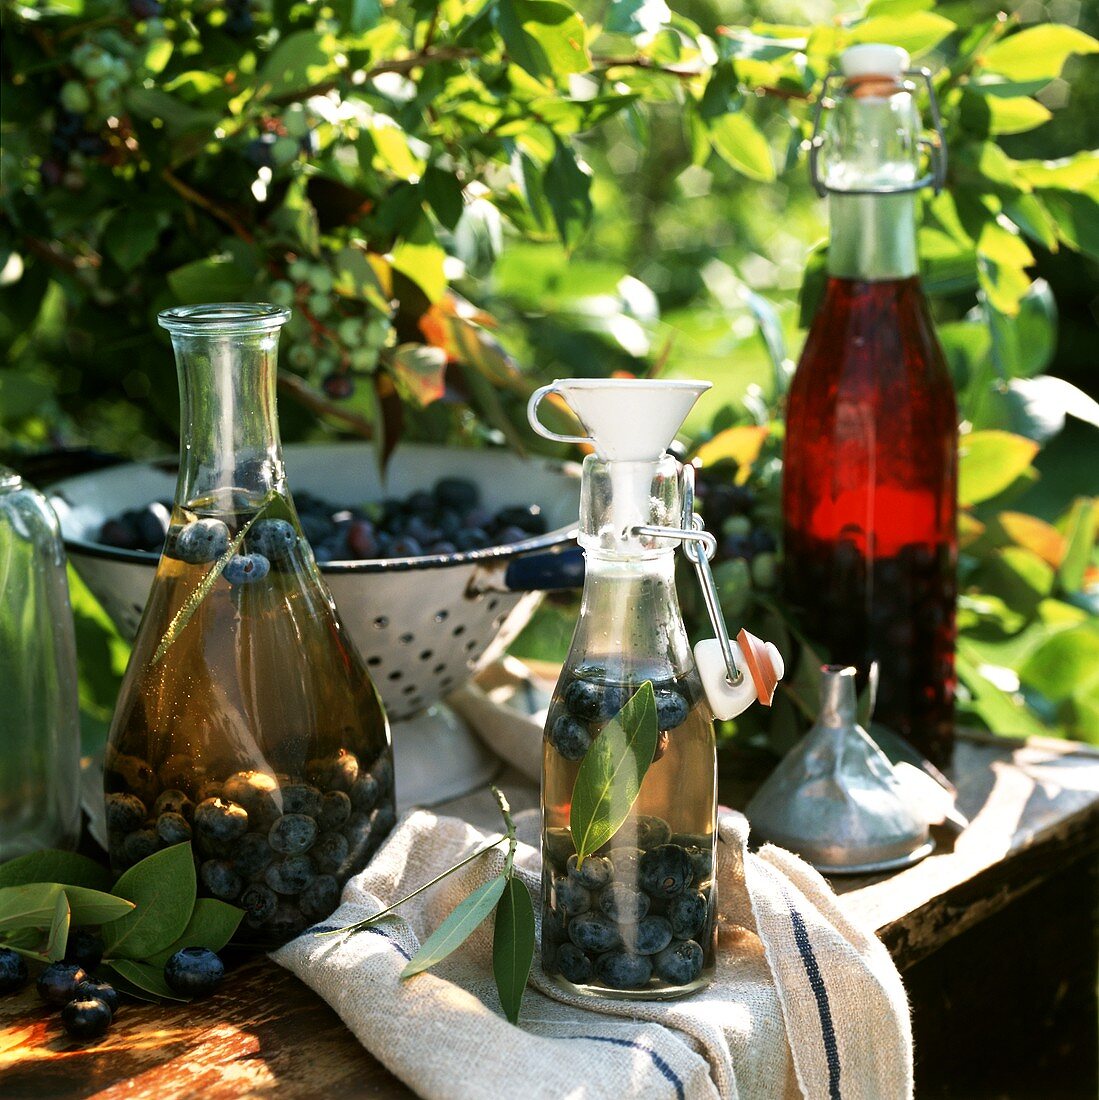 Blueberry Vinegar in Glass Bottles with Fresh Blueberries on an Outdoor Table